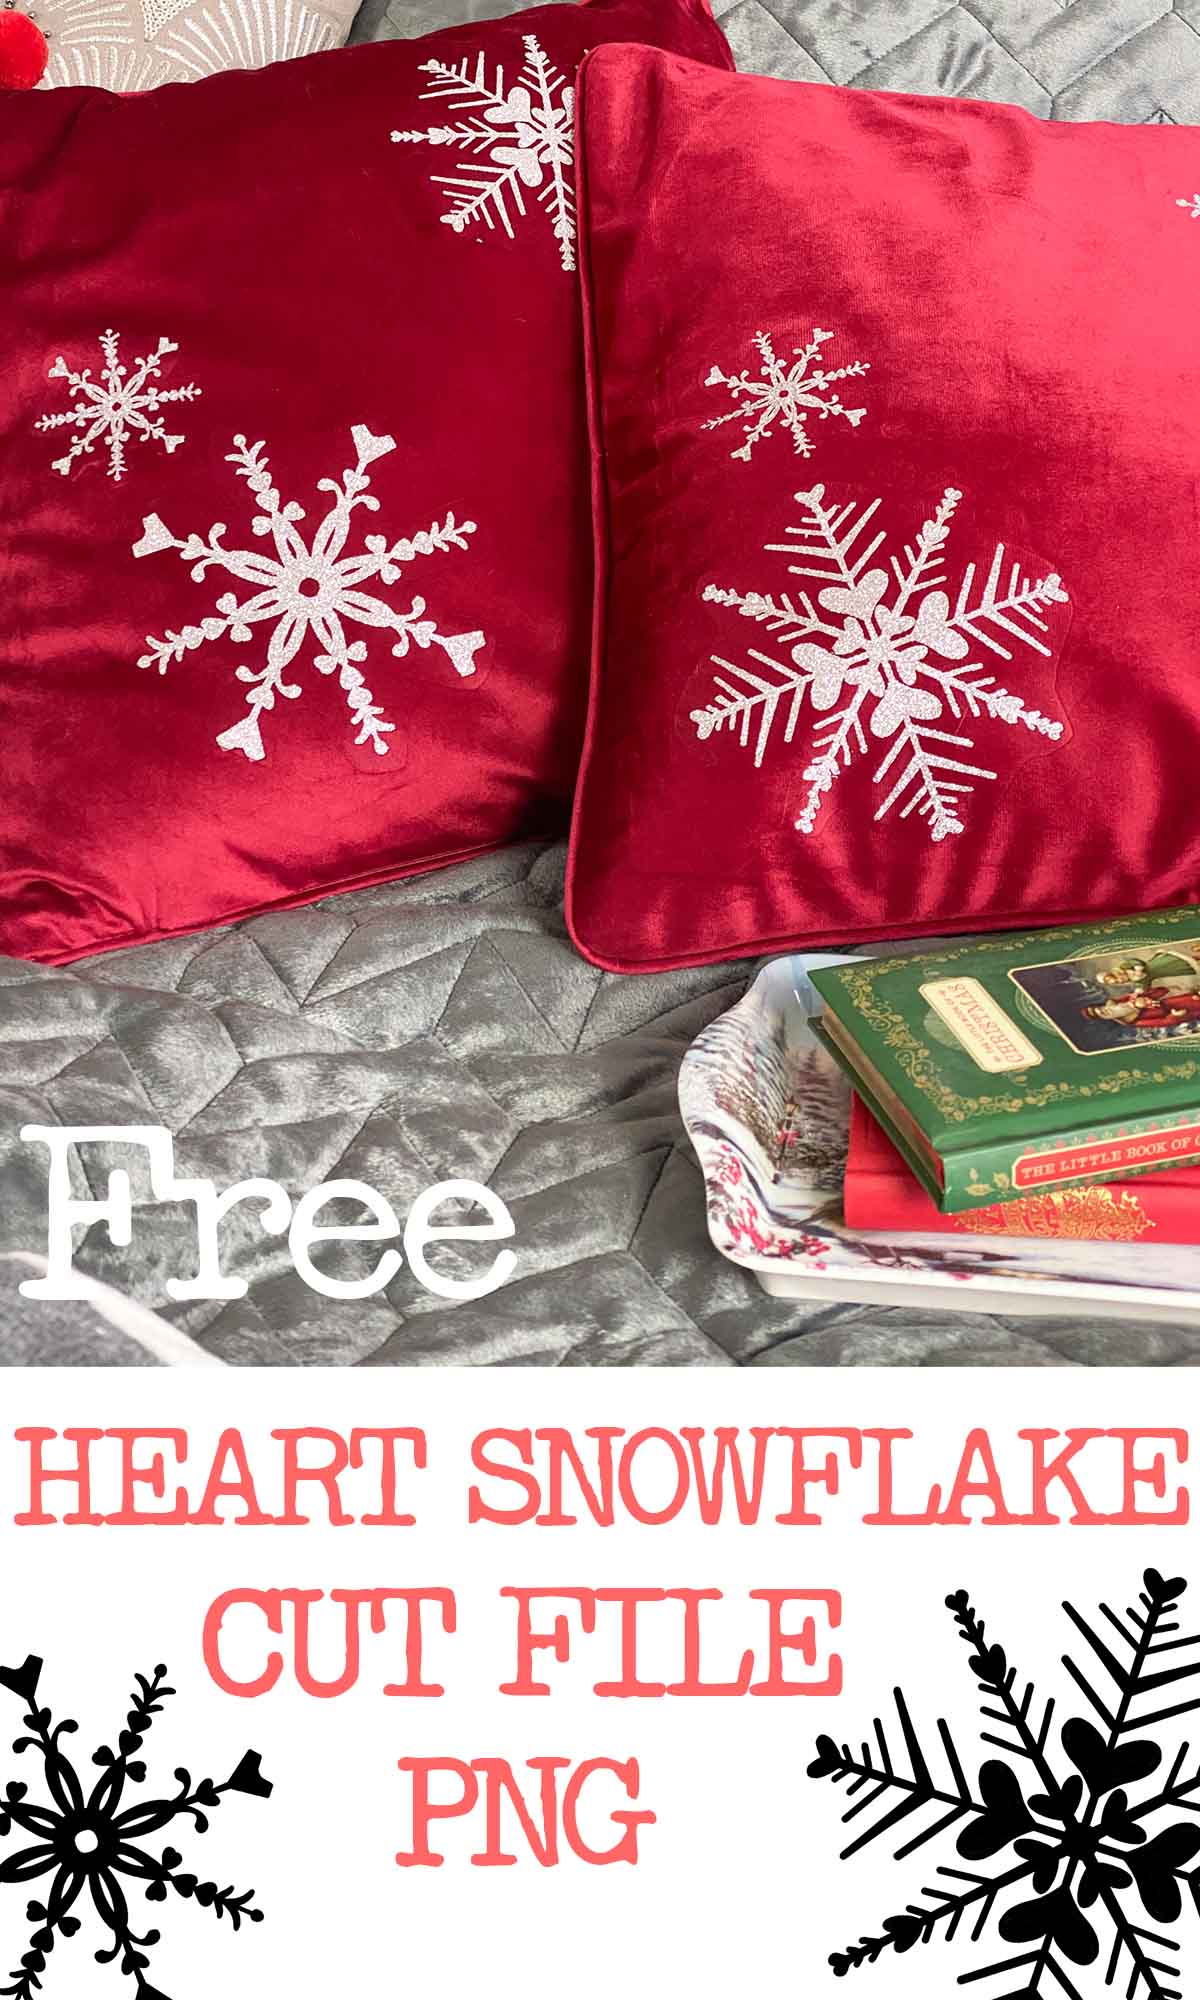 Free Heart Snowflake PNG on red velvet cushions with silver glitter vinyl snowflakes on a Christmas styled bed. Free heart snowflake cut file ready to download now